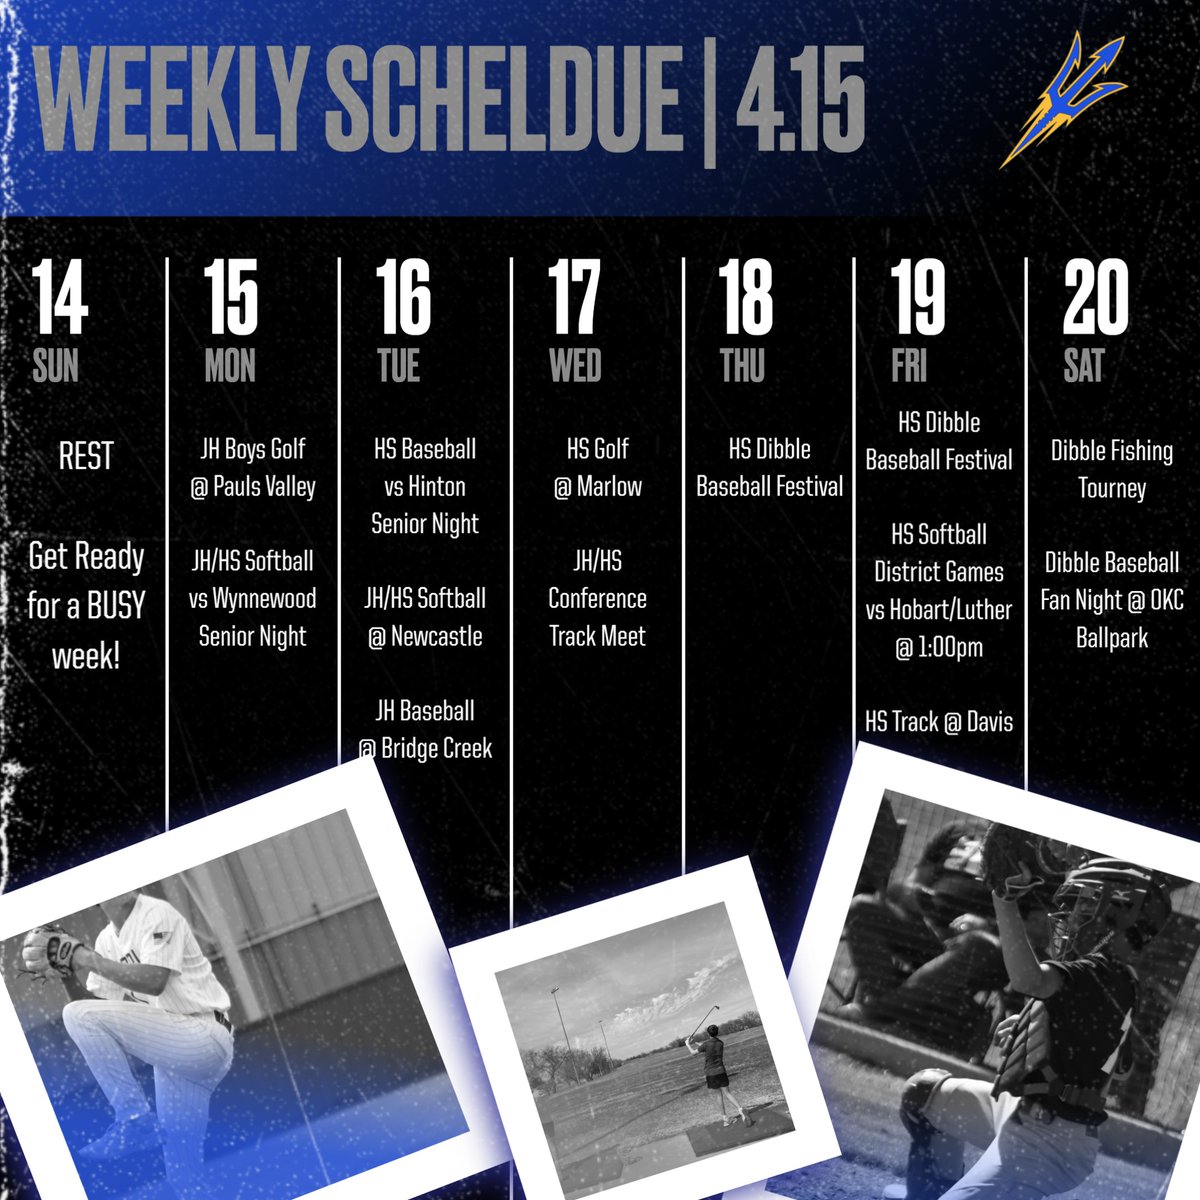 It is another busy week for our student-athletes!